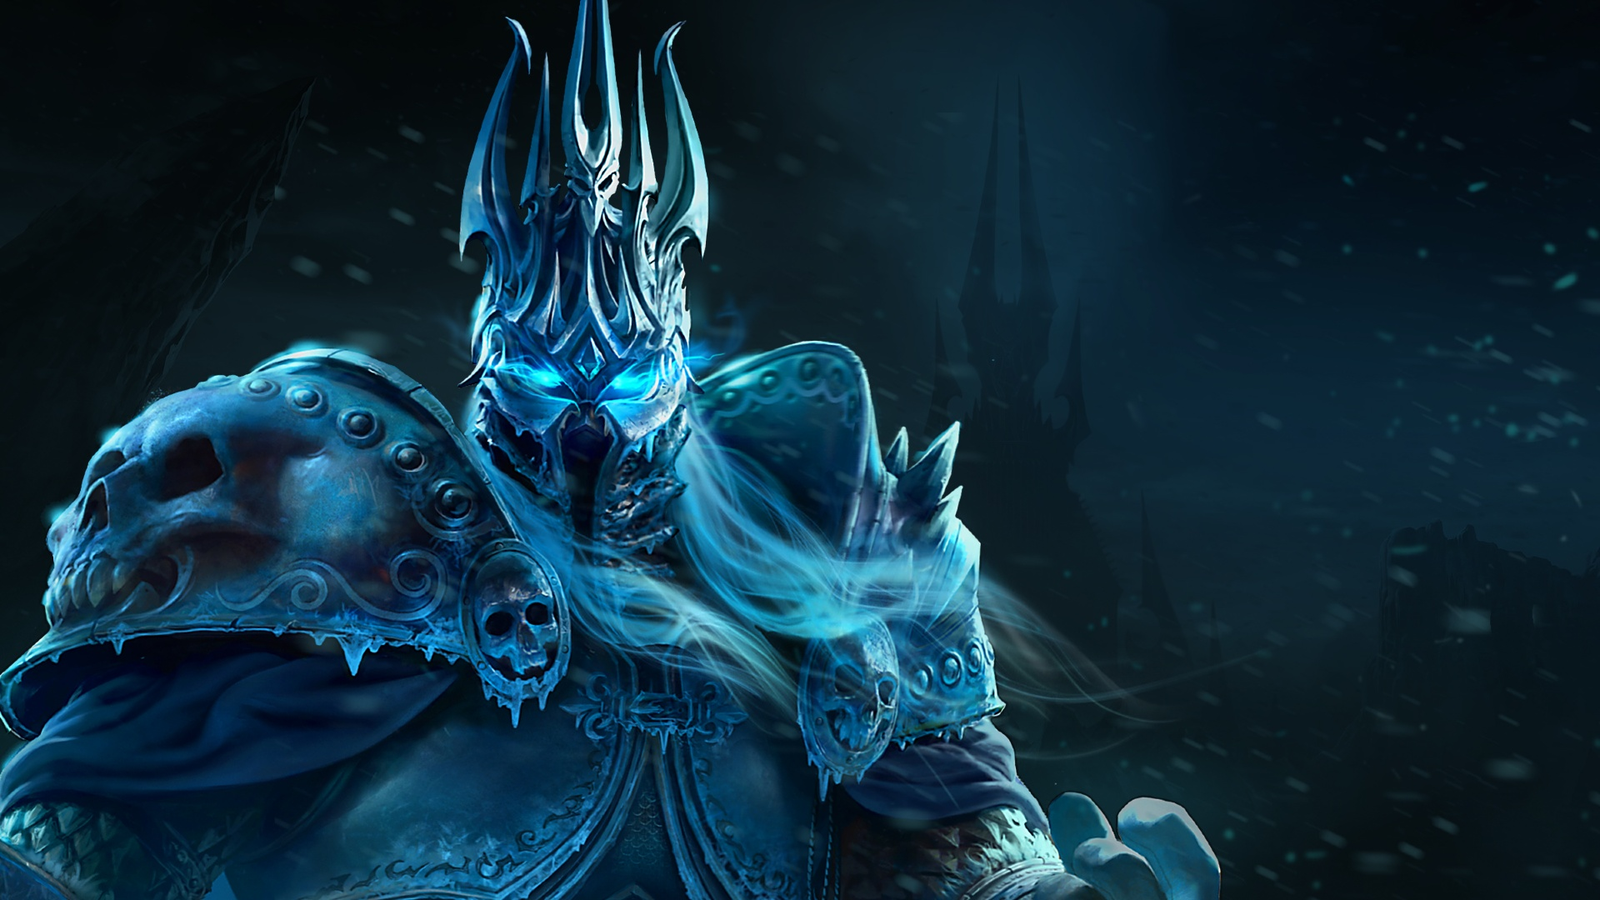 https://assetsio.reedpopcdn.com/World-Of-Warcraft-Wrath-Of-The-Lich-King.jpg?width=1600&height=900&fit=crop&quality=100&format=png&enable=upscale&auto=webp